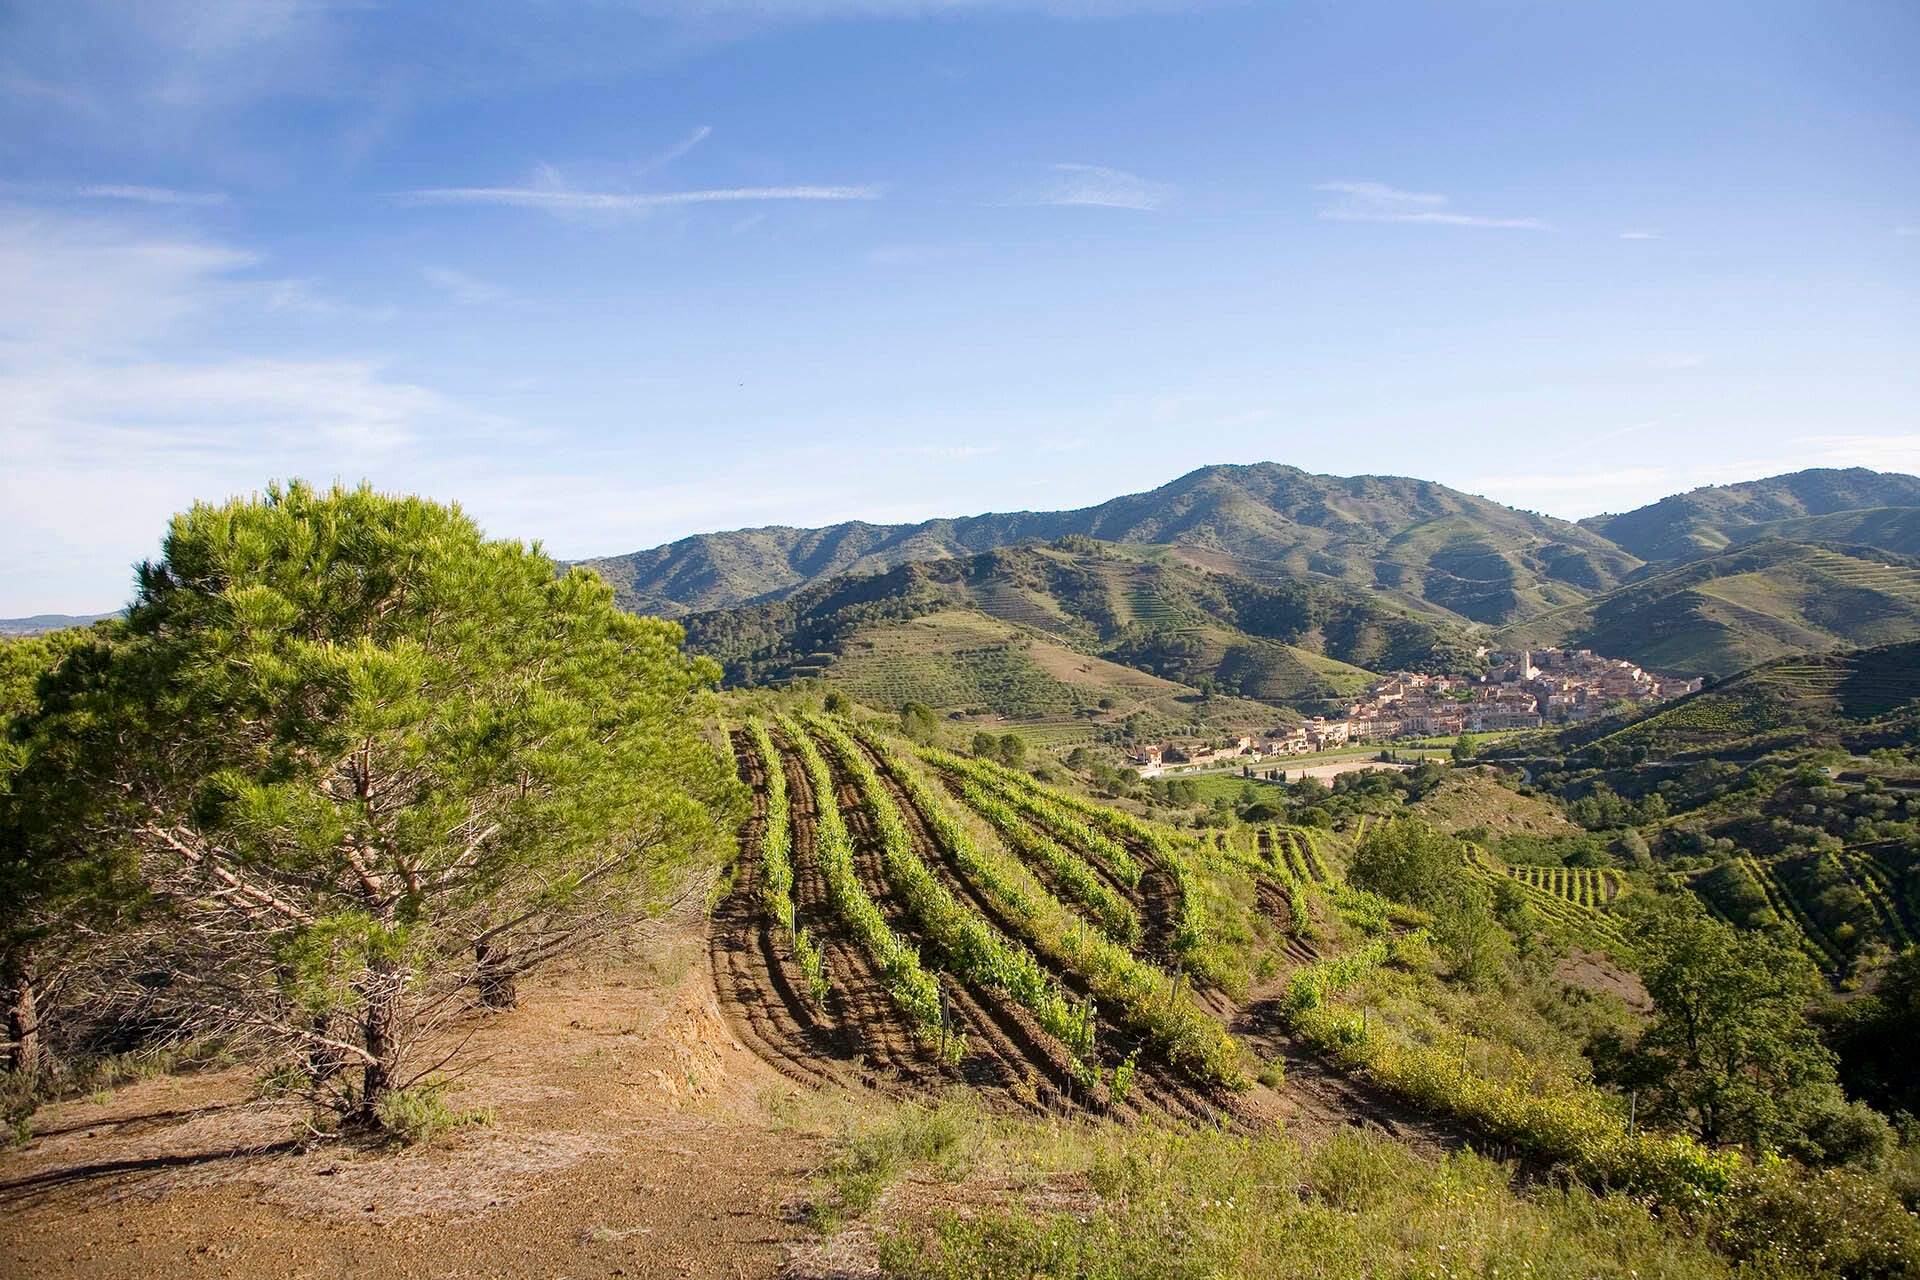 The wine region of Priorat with the town of Porrera in distance